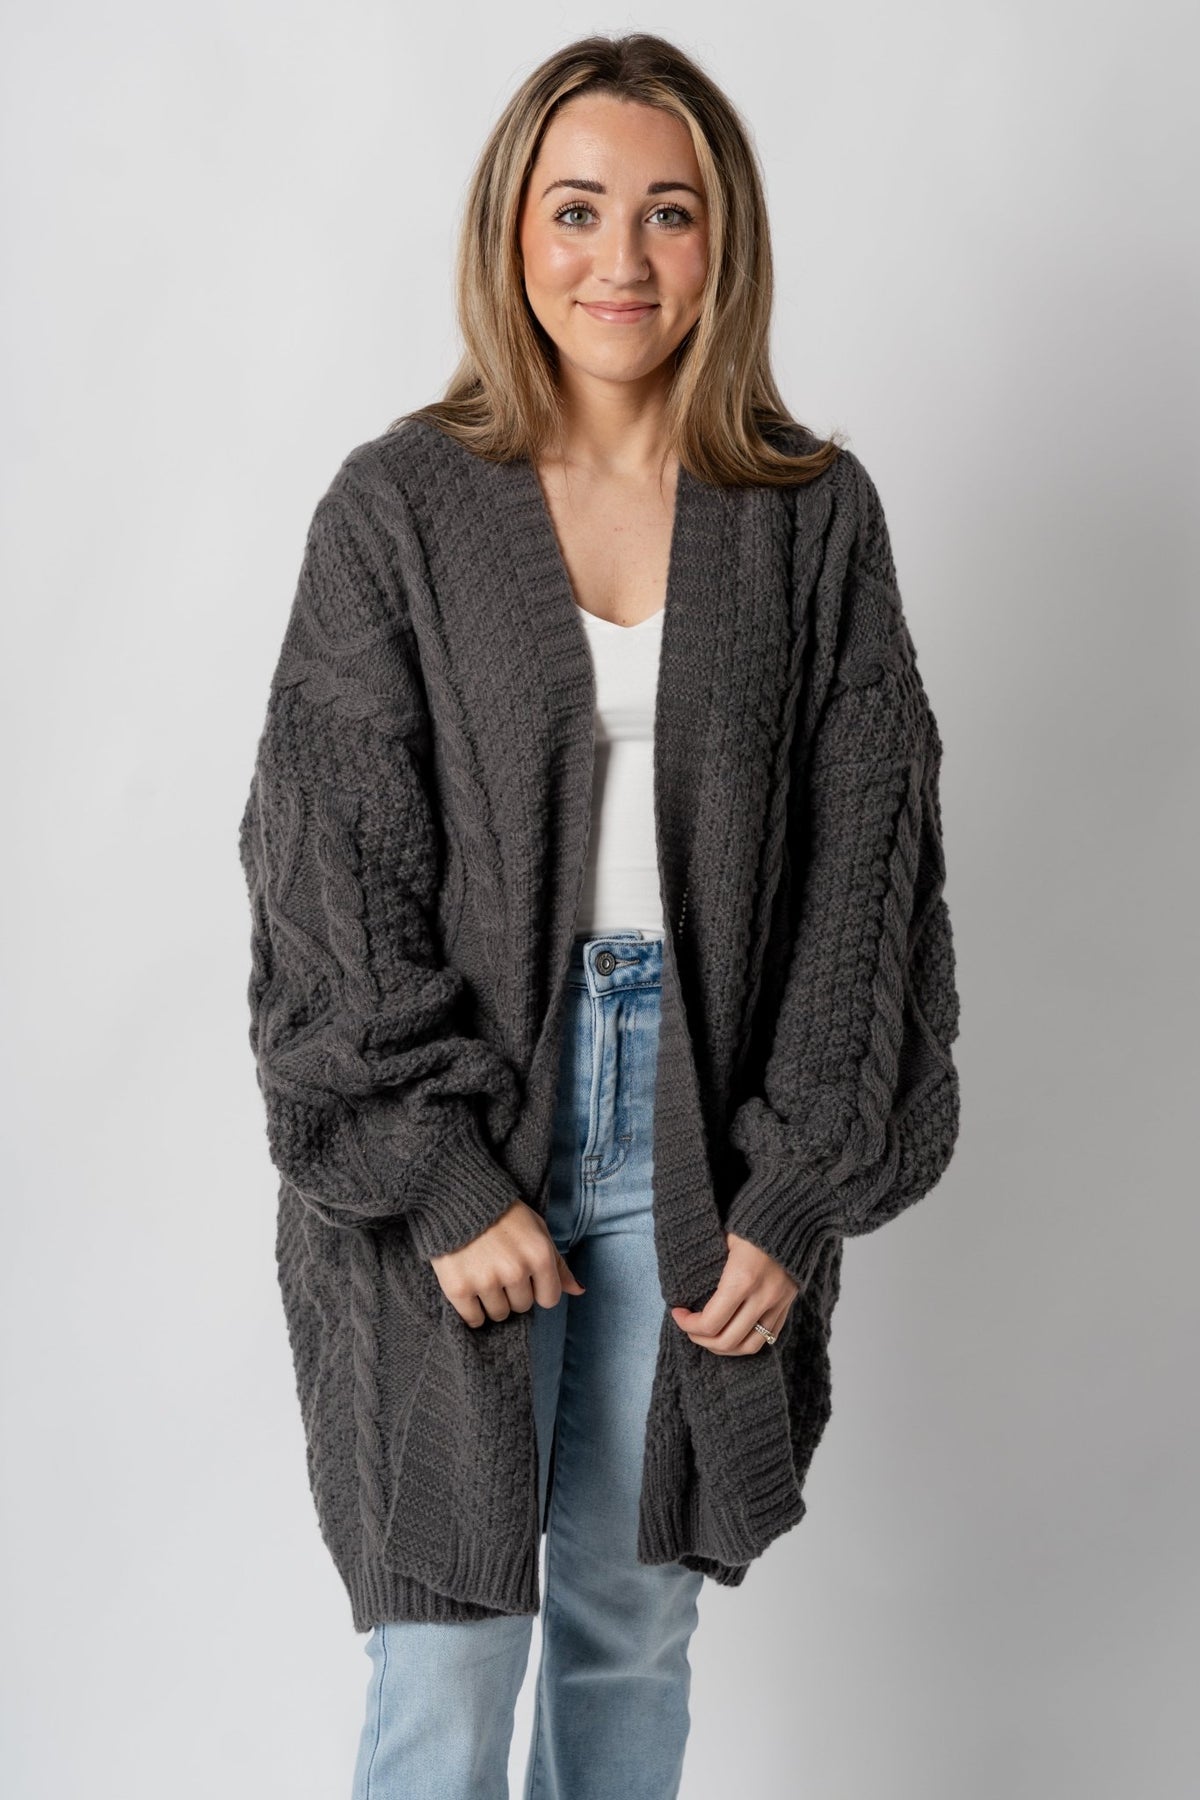 Chunky cable knit cardigan charcoal - Cute Cardigan - Trendy Cardigans & Stylish Kimonos at Lush Fashion Lounge Boutique in Oklahoma City